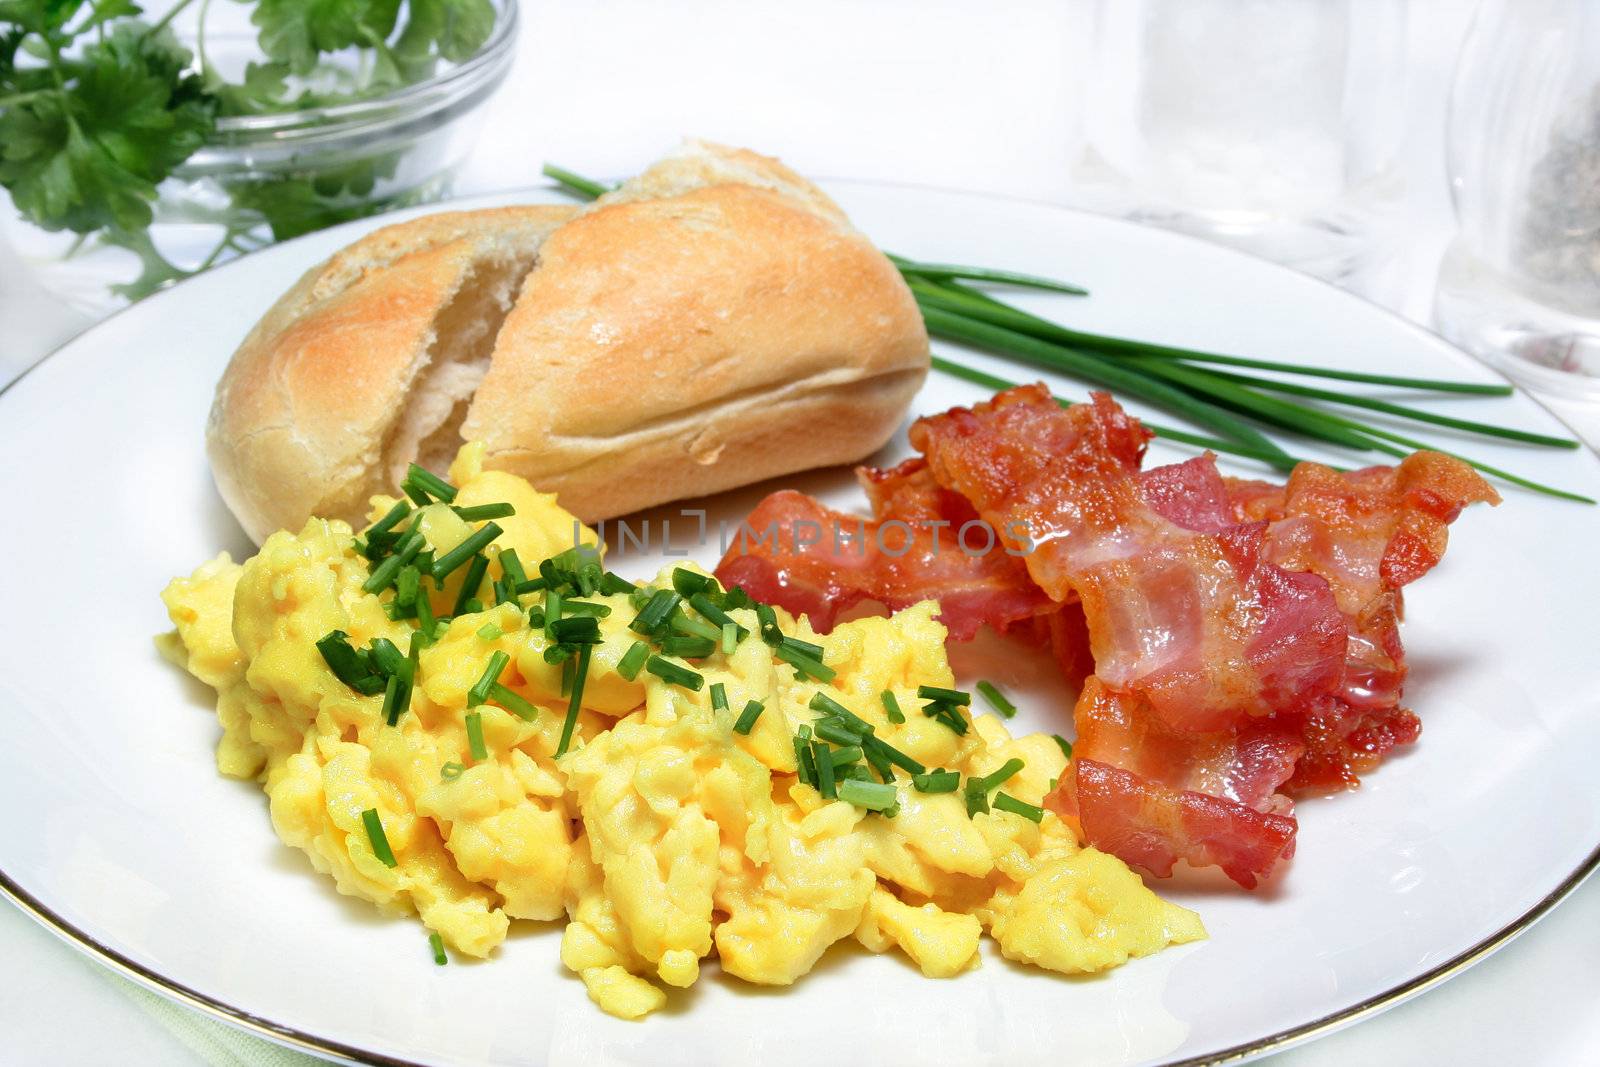 Scrambled eggs with bacon and bread